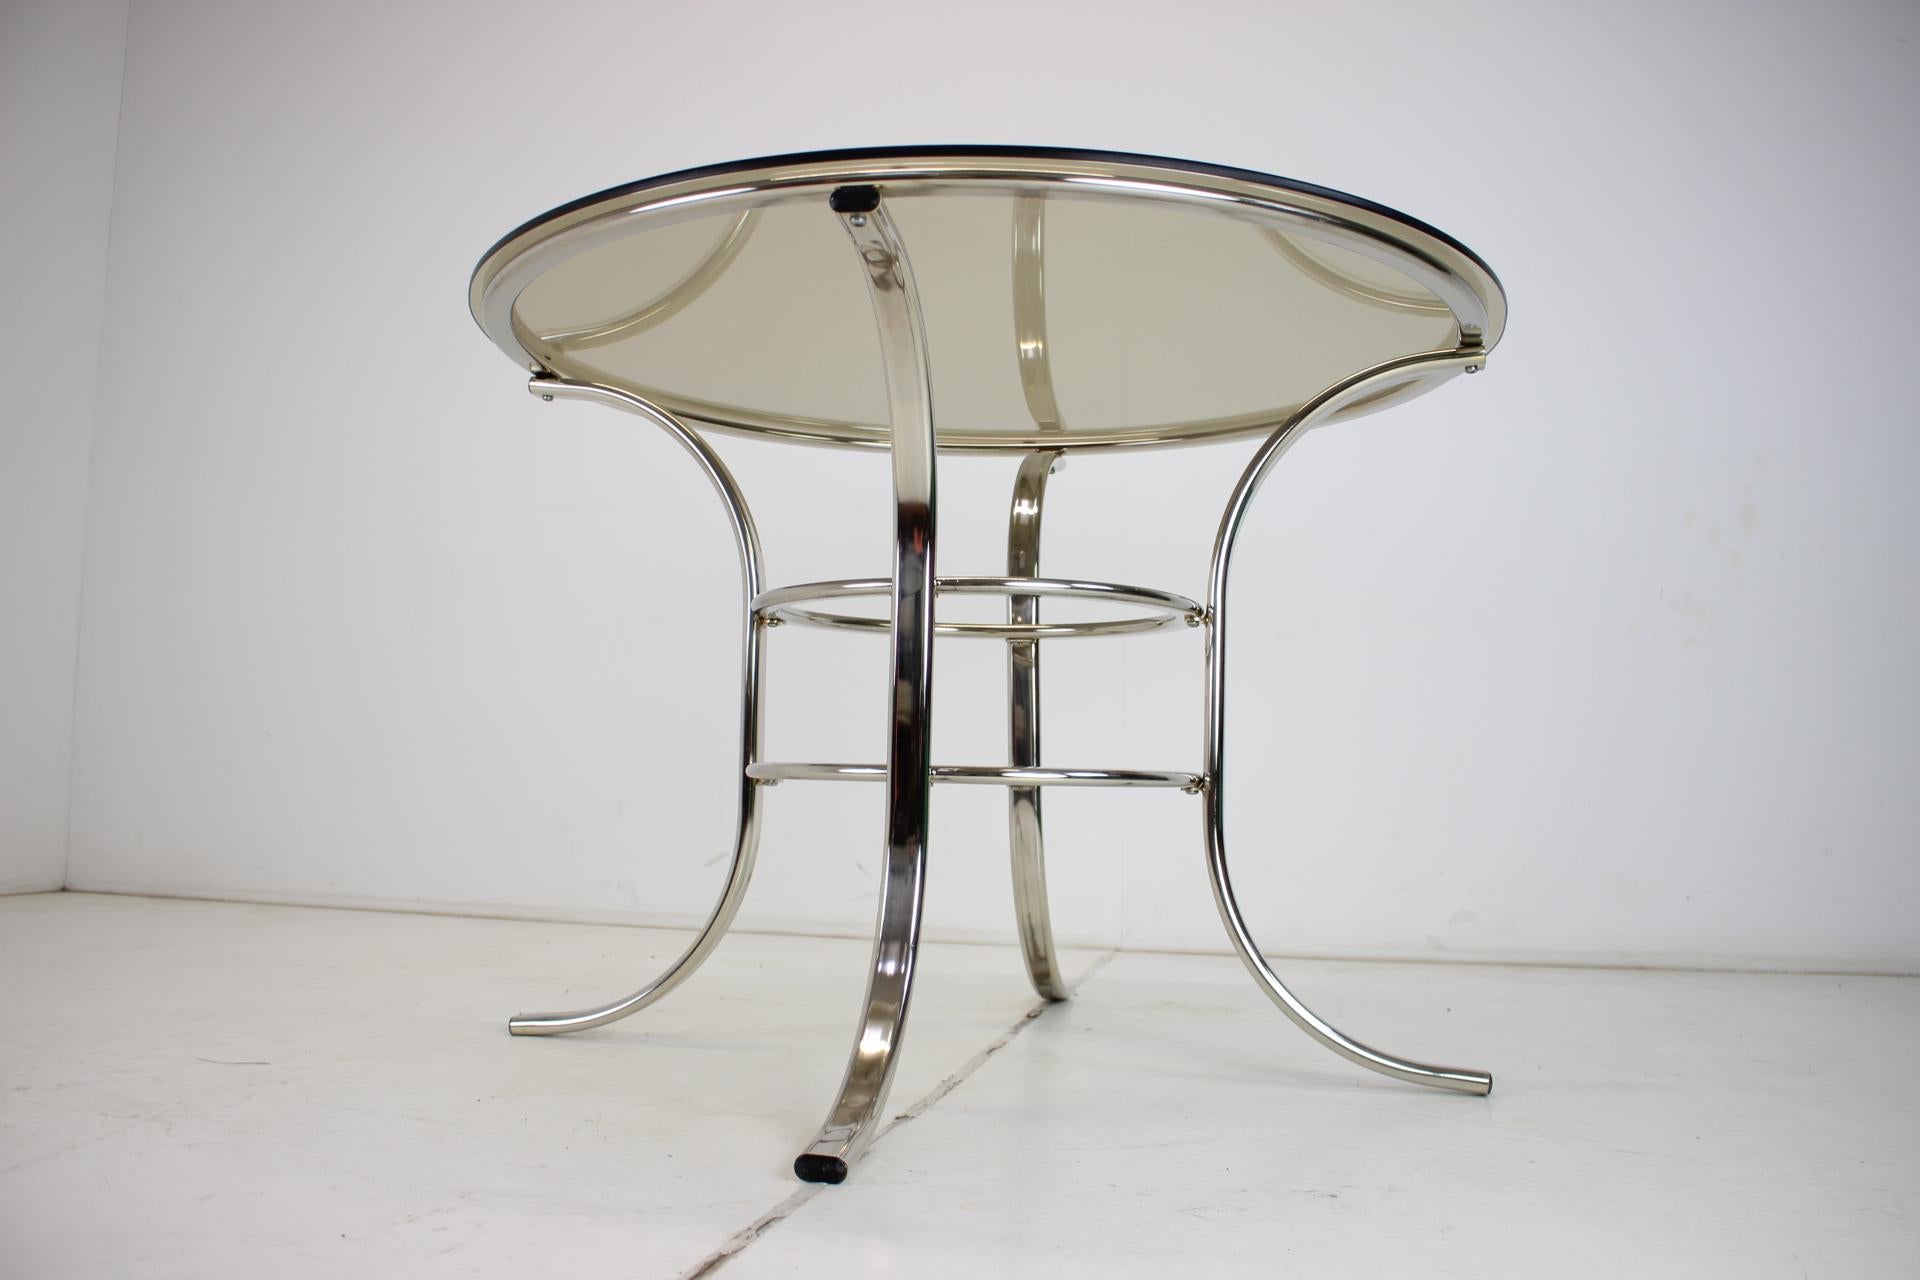 Italian Midcentury Chrome and Glass Dining Table, Italy 1970s For Sale